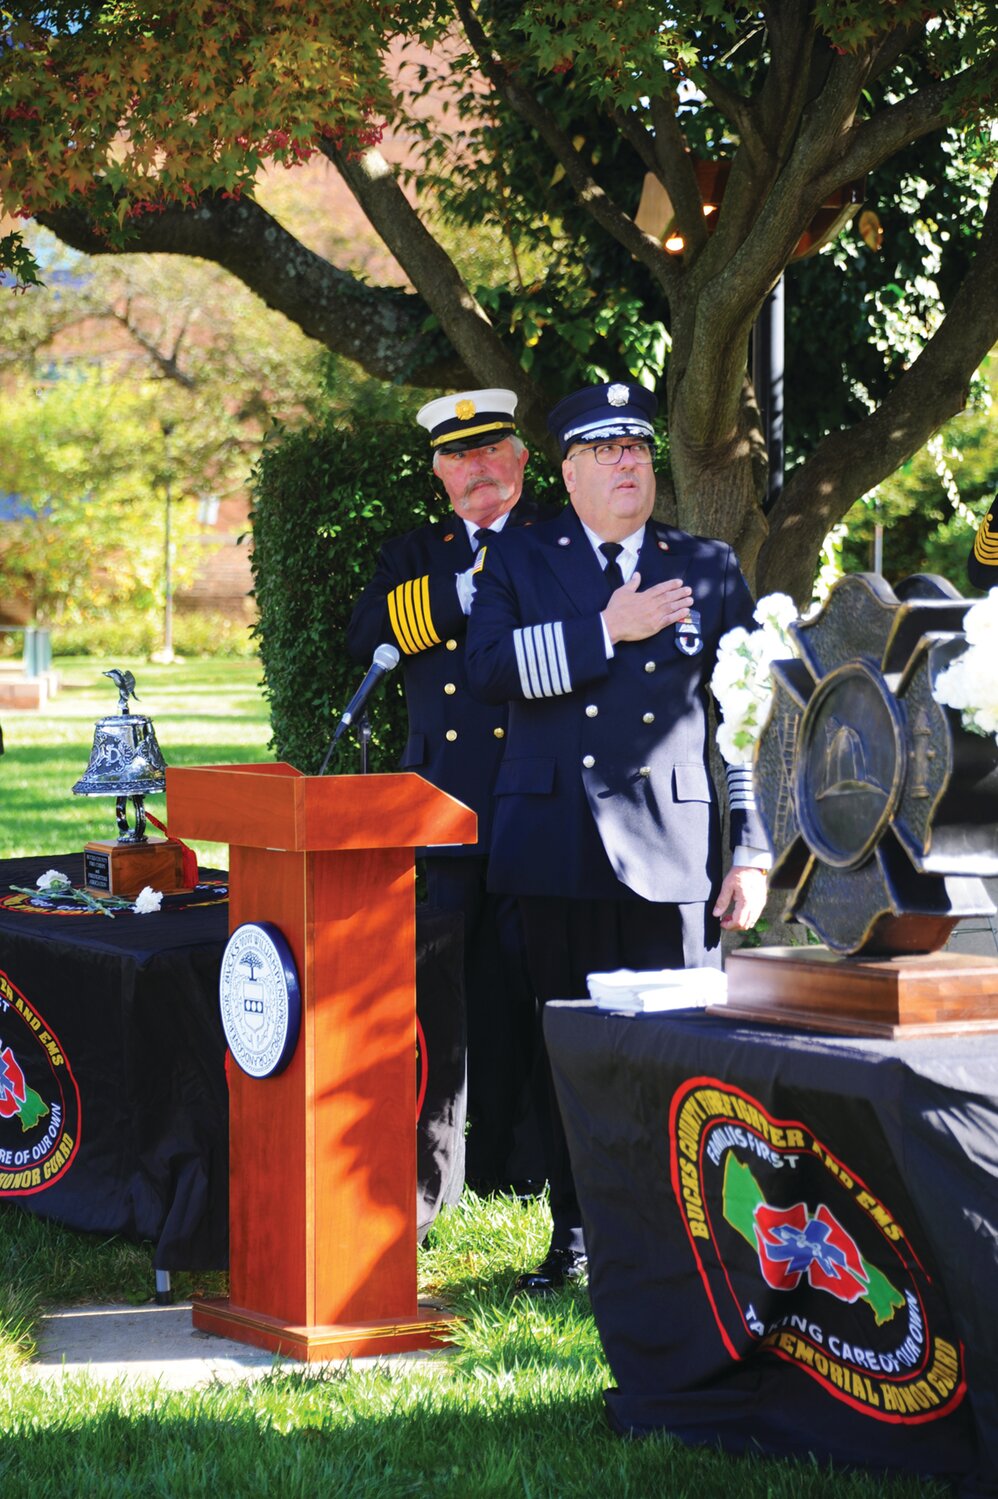 Paul Kreuter, co-chair, Bucks County Fallen Firefighters Memorial Committee, places his hand over his heart.